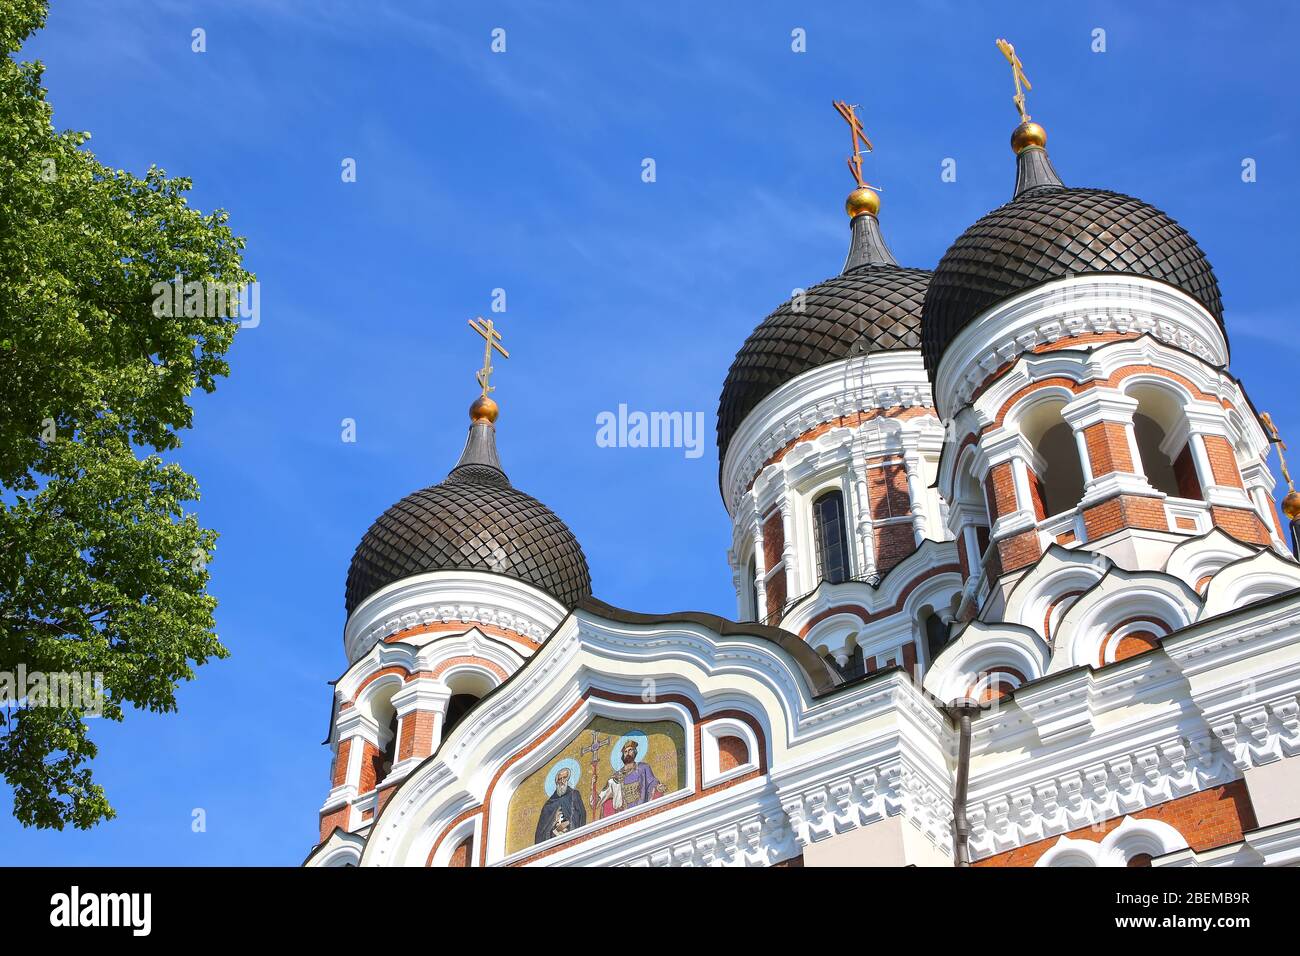 The Alexander Nevsky Cathedral is an orthodox cathedral in the Tallinn Old Town, Estonia. It was built to a design by Mikhail Preobrazhensky in a typi Stock Photo